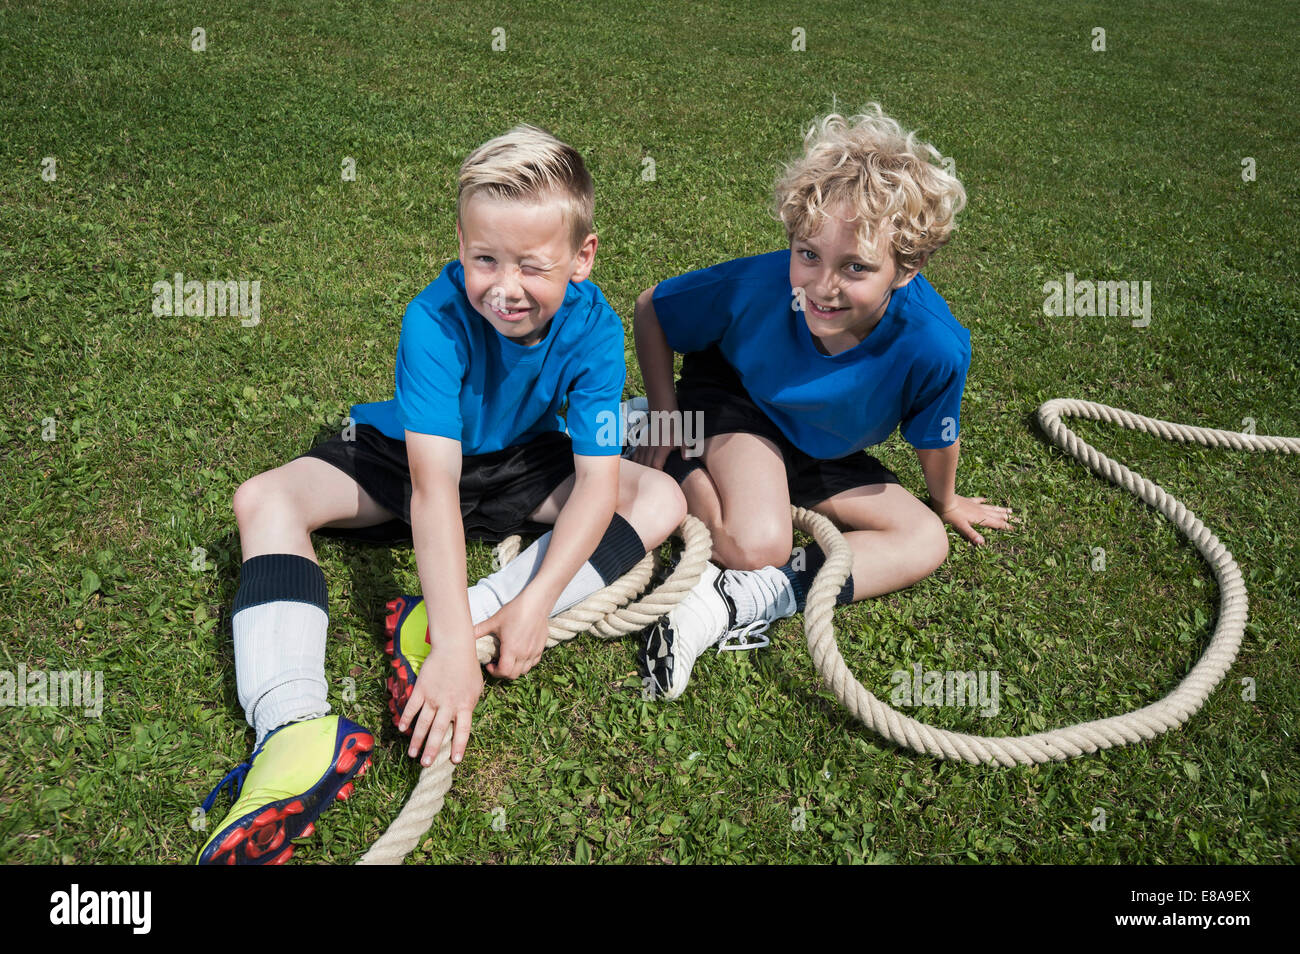 Two young boys resting on grass Tug-of-war Stock Photo